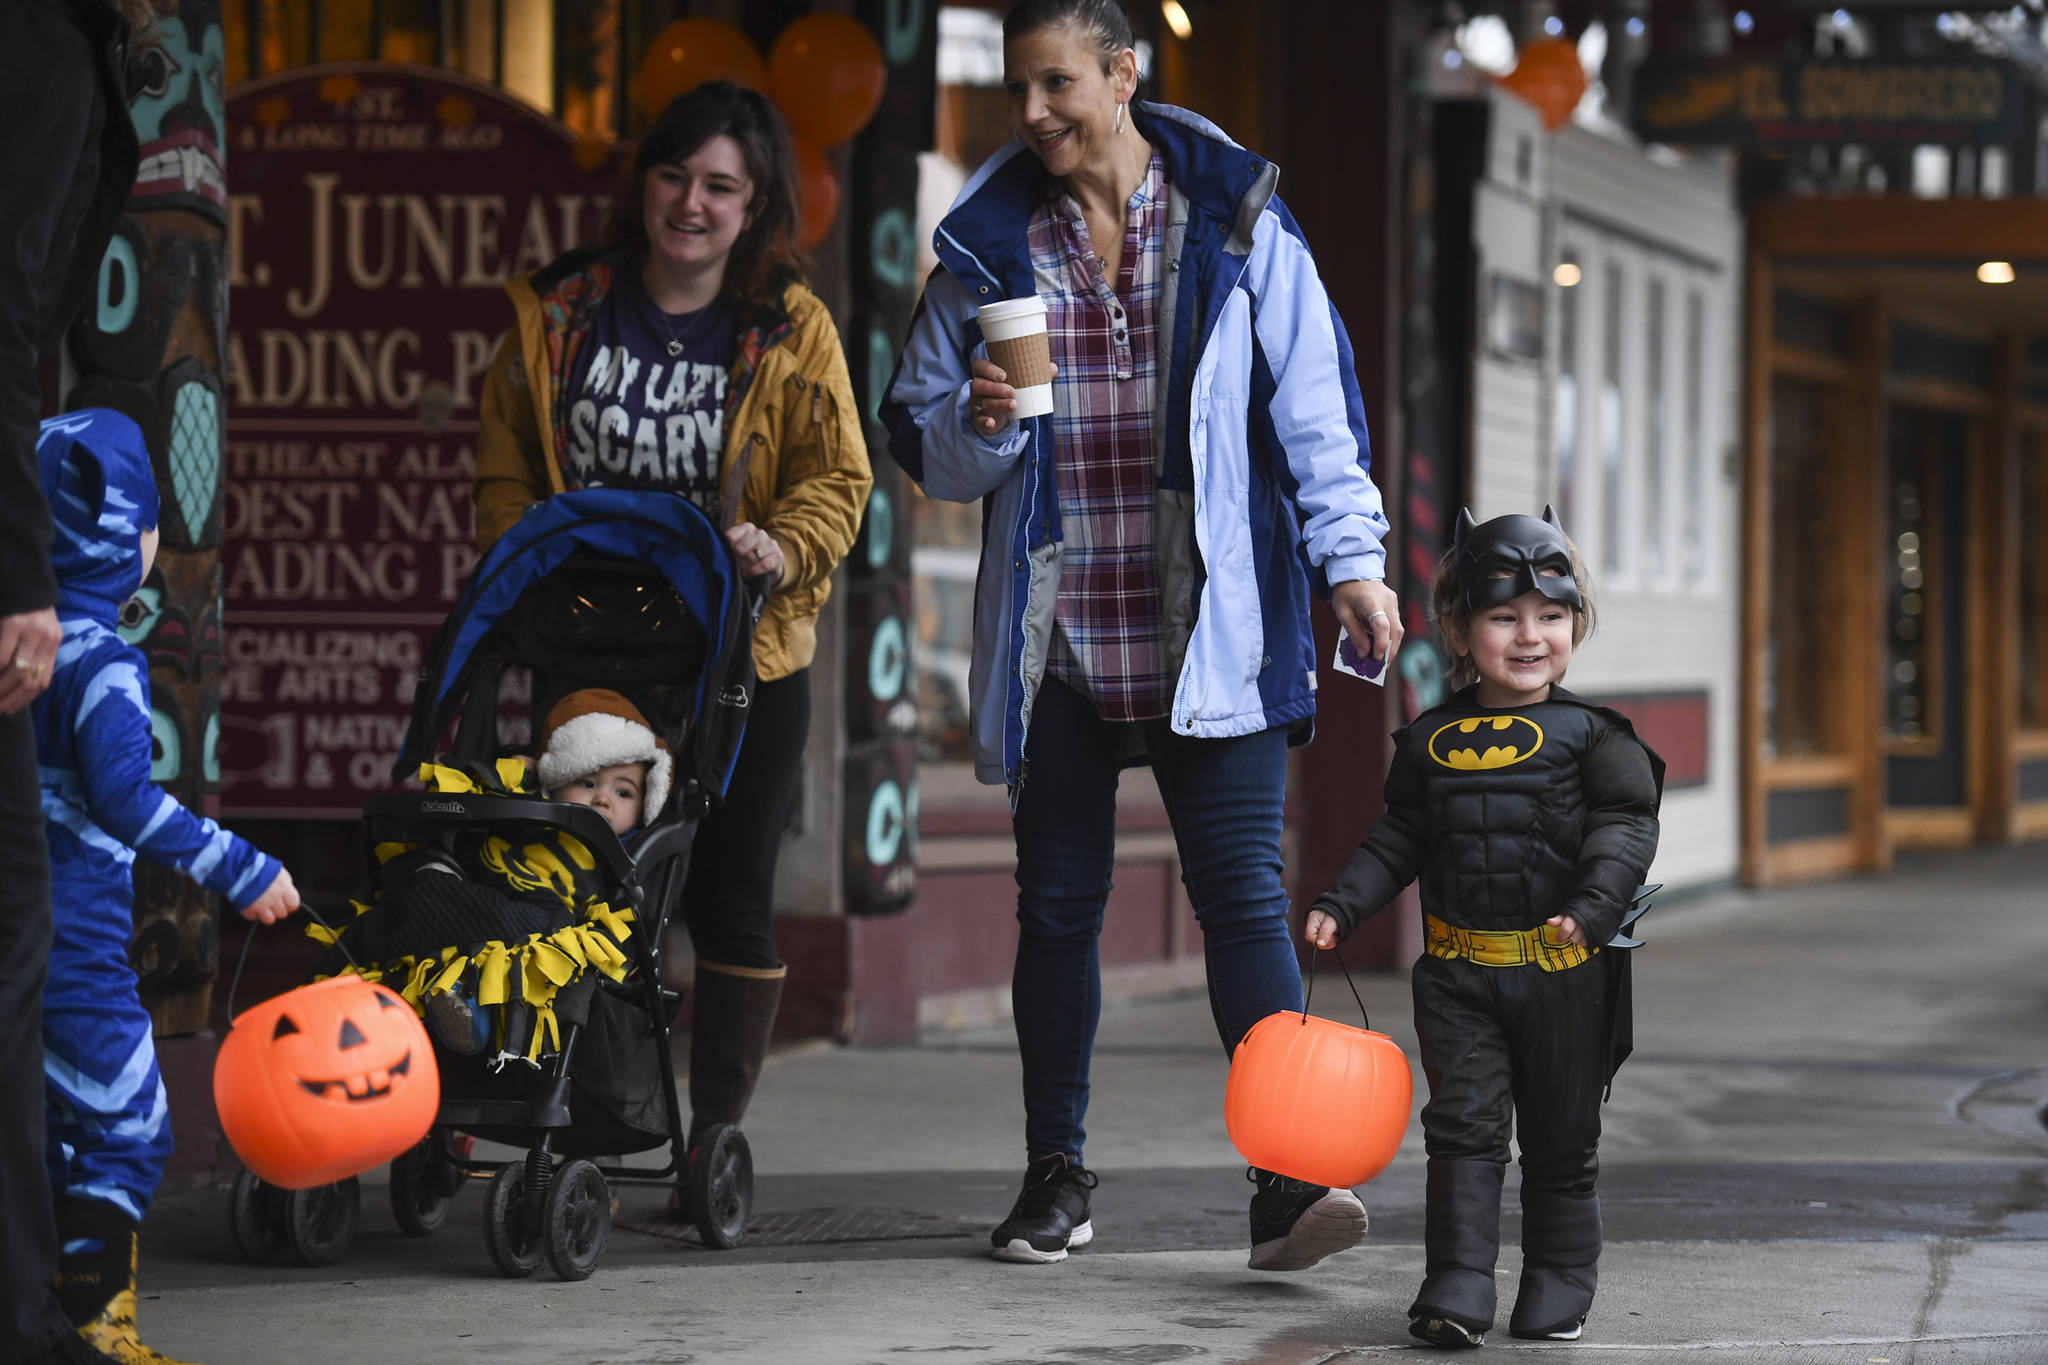 Chloe Caordova, left, makes her way down Franklin Street with her children, Ashton, 1, and Leonardo, 3, and Rochelle Sabadin during the Trick or Treat Downtown event on Thursday, Oct. 31, 2019. More than 70 business put out orange balloons to participate in the event aimed at young children. (Michael Penn | Juneau Empire)